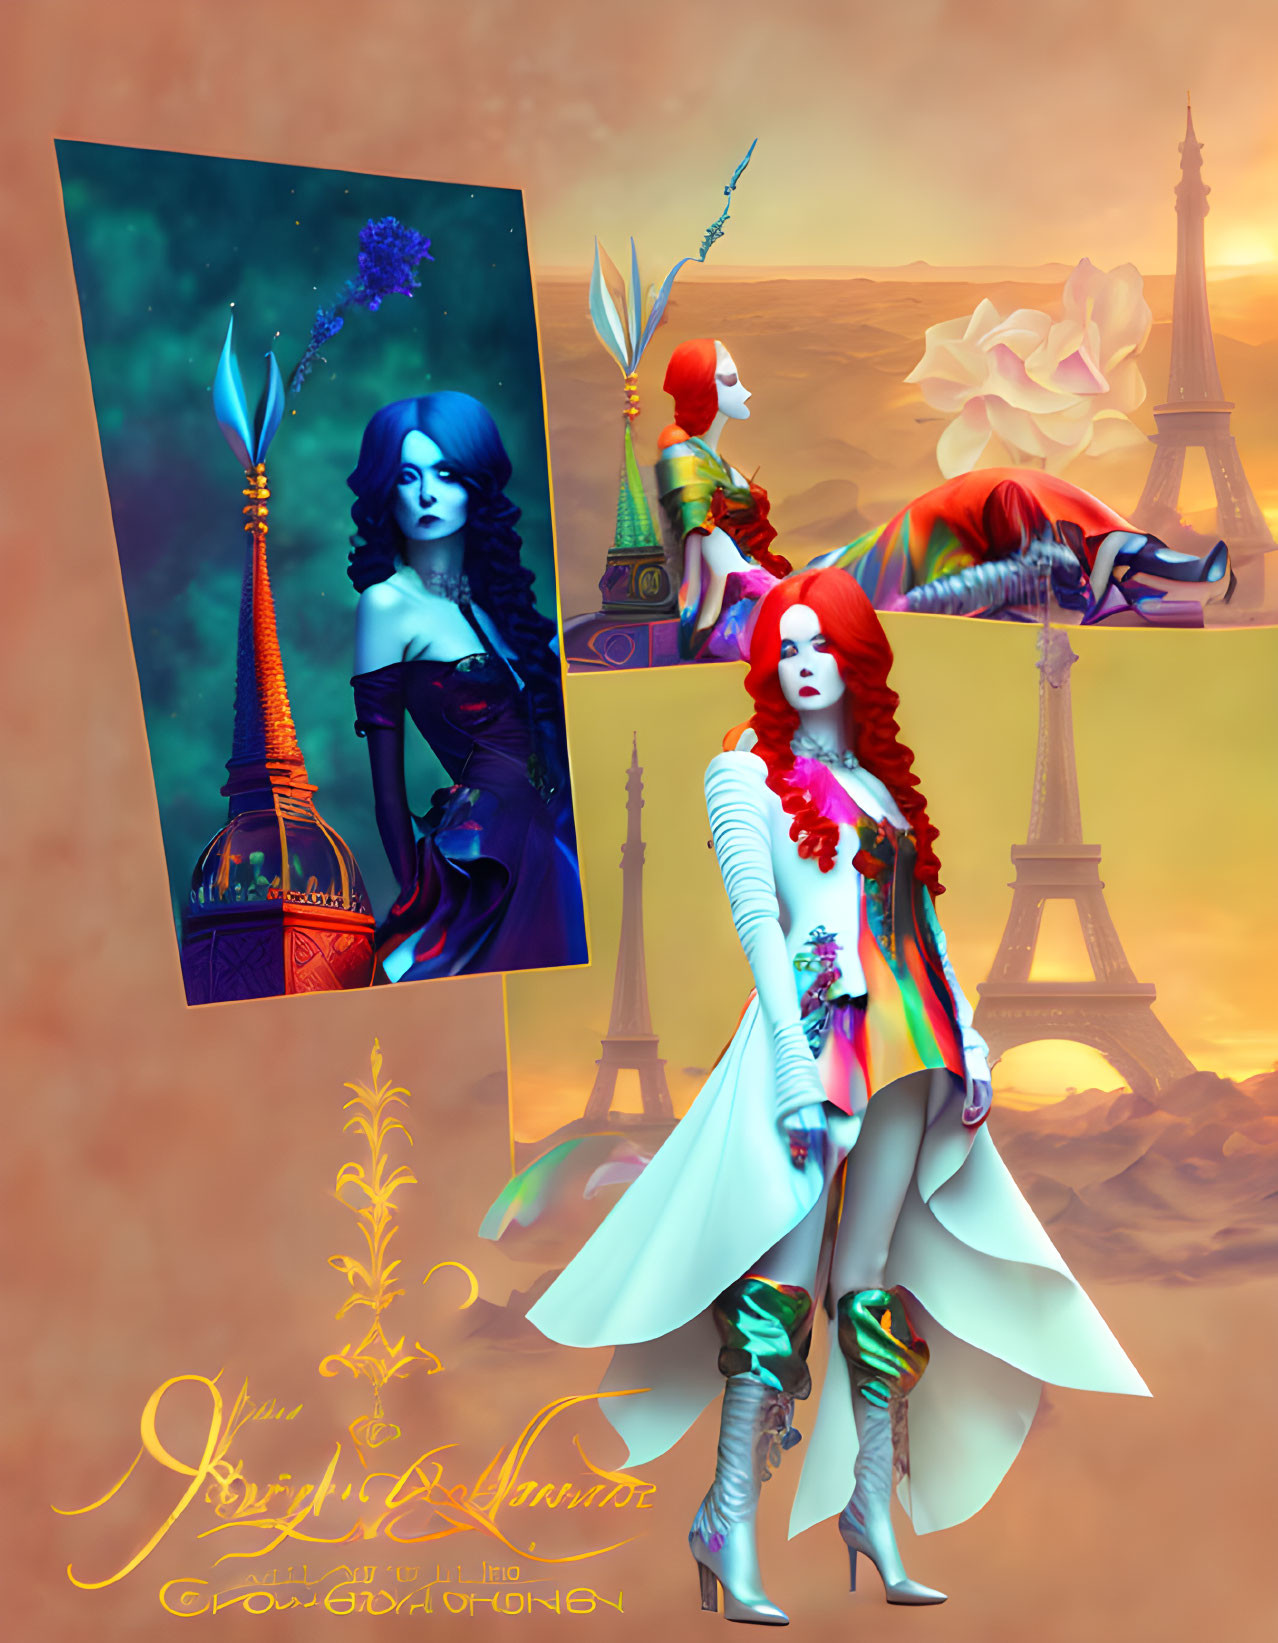 Vibrant surreal artwork: Two women with colorful hair and intricate outfits posing amid floating Eiffel